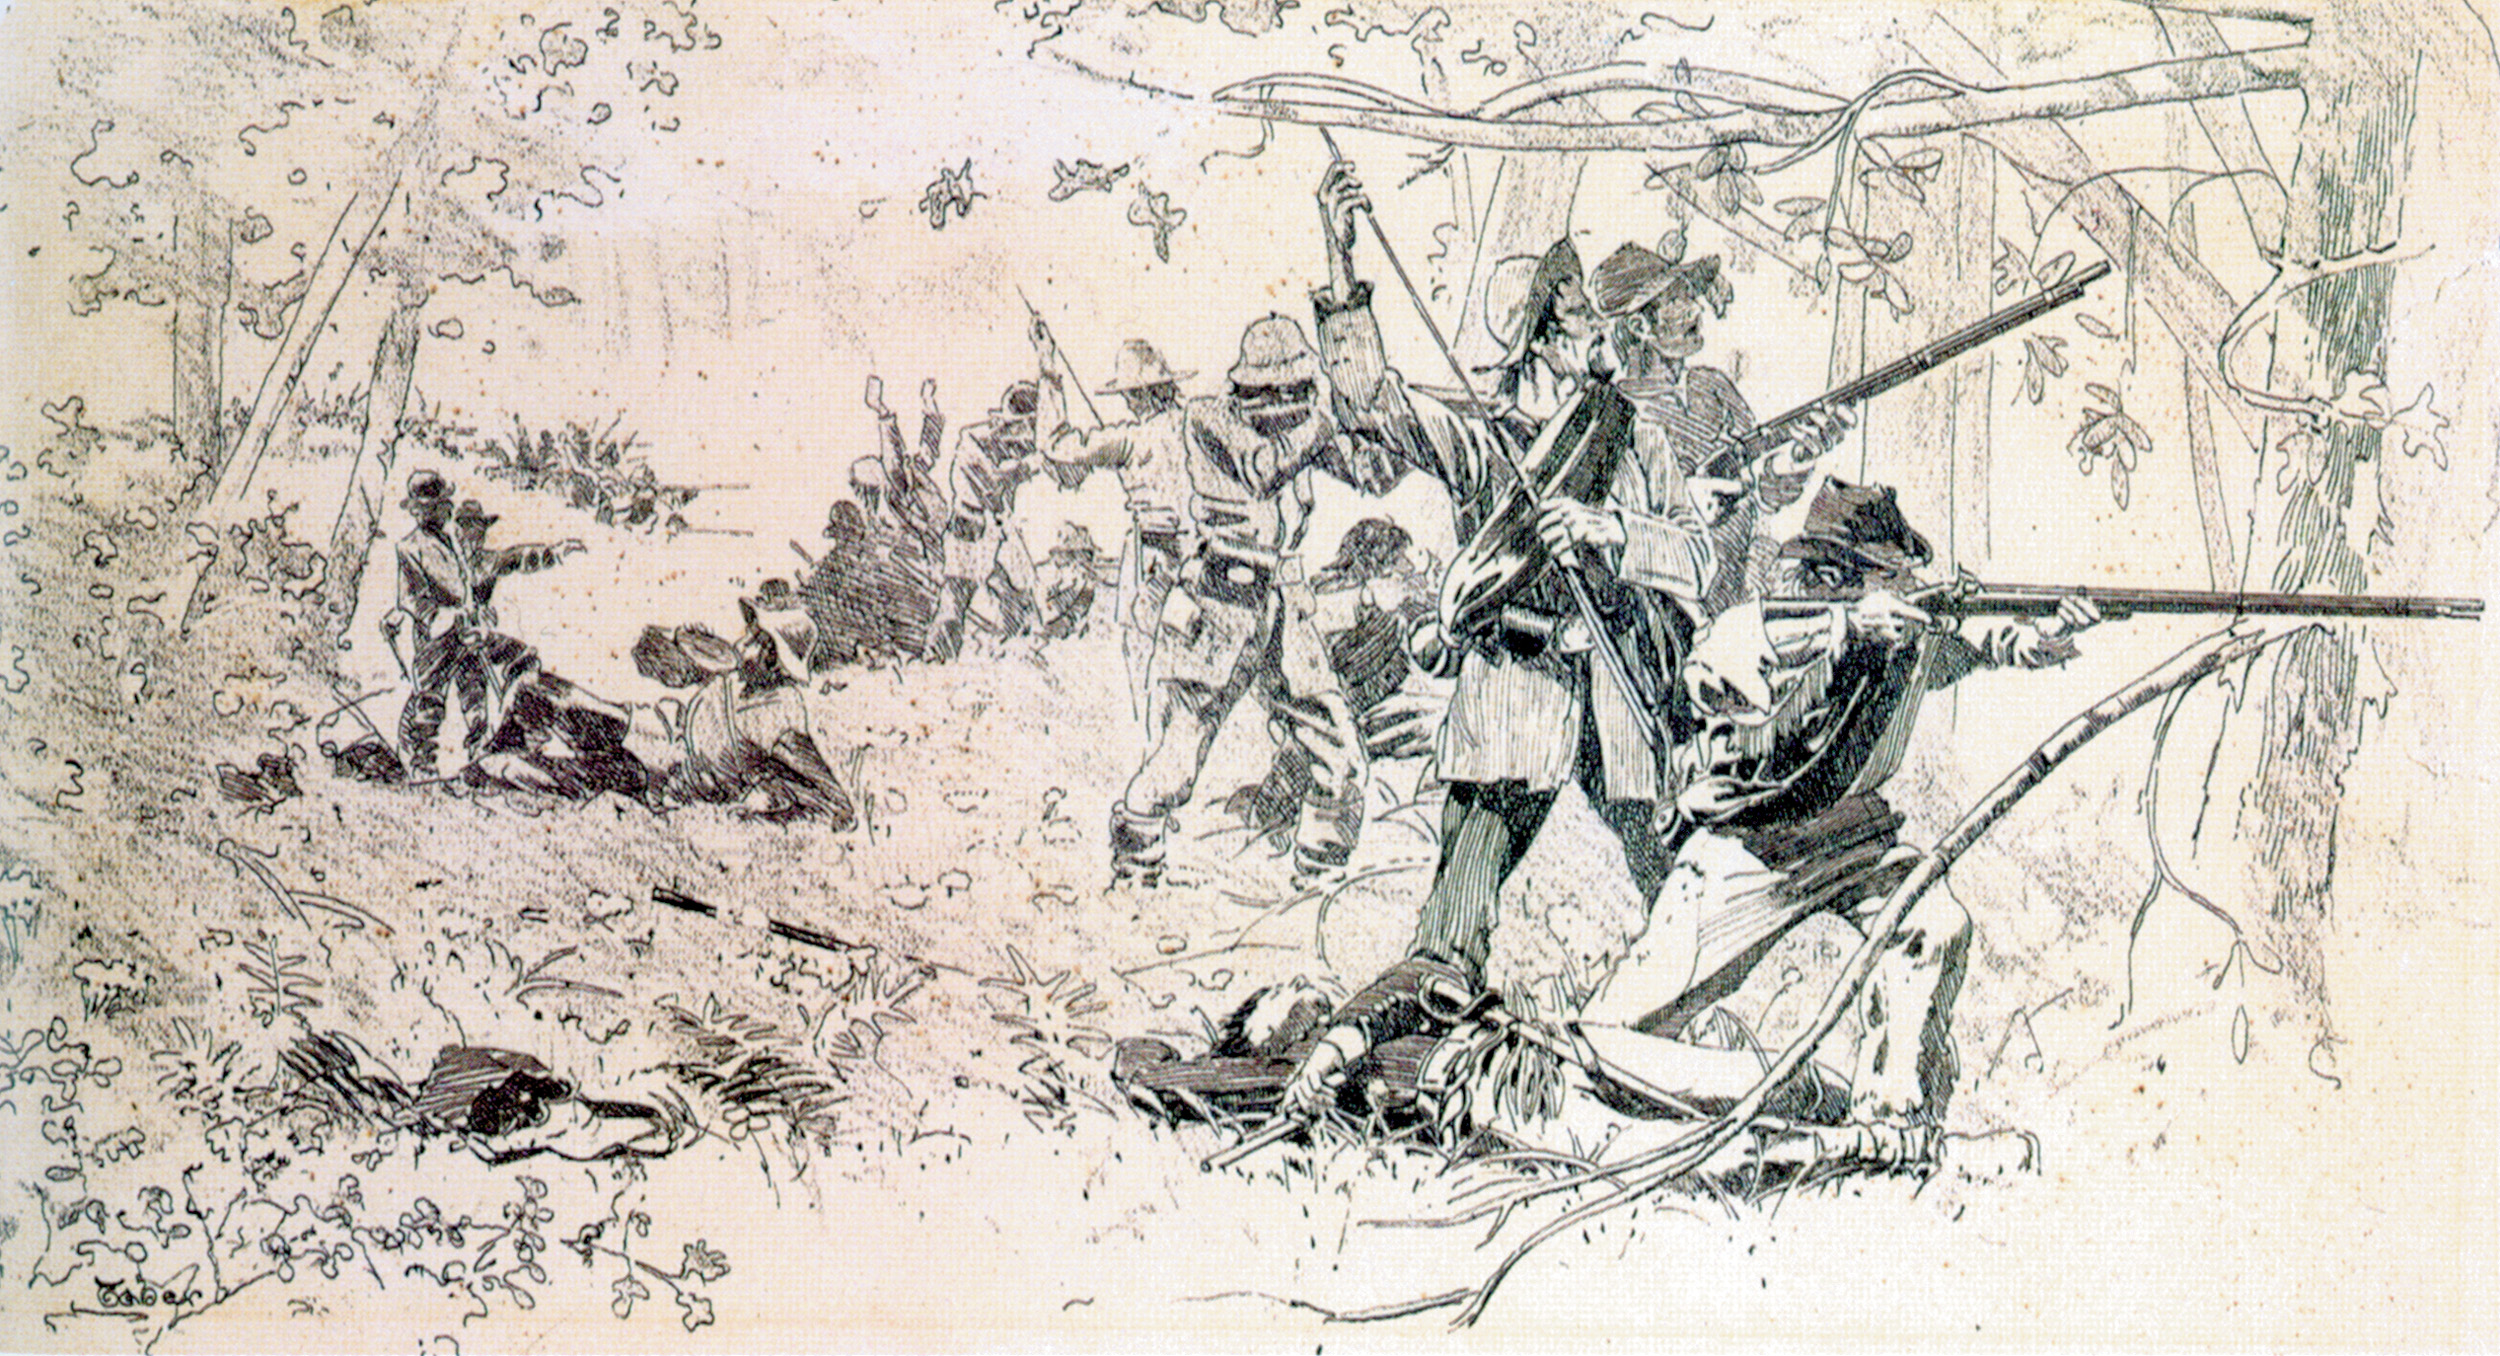 Rebels fire in the thick woods. Much of the fighting was disjointed on account of the terrain. 